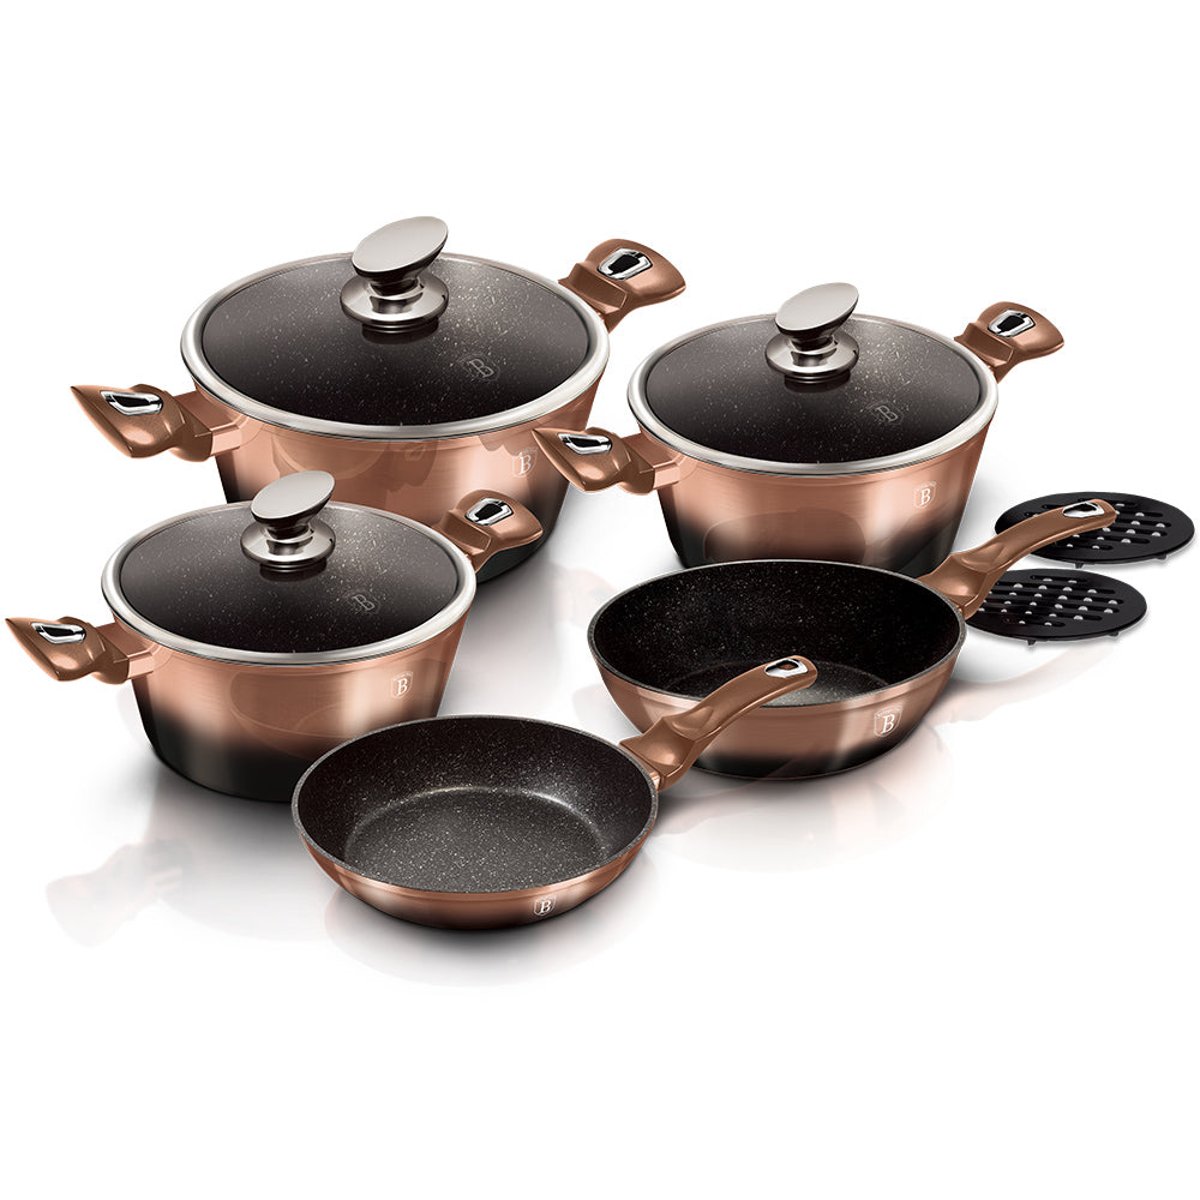 Berlinger Haus 13-Piece Kitchen Cookware Set, Rose Gold Collection